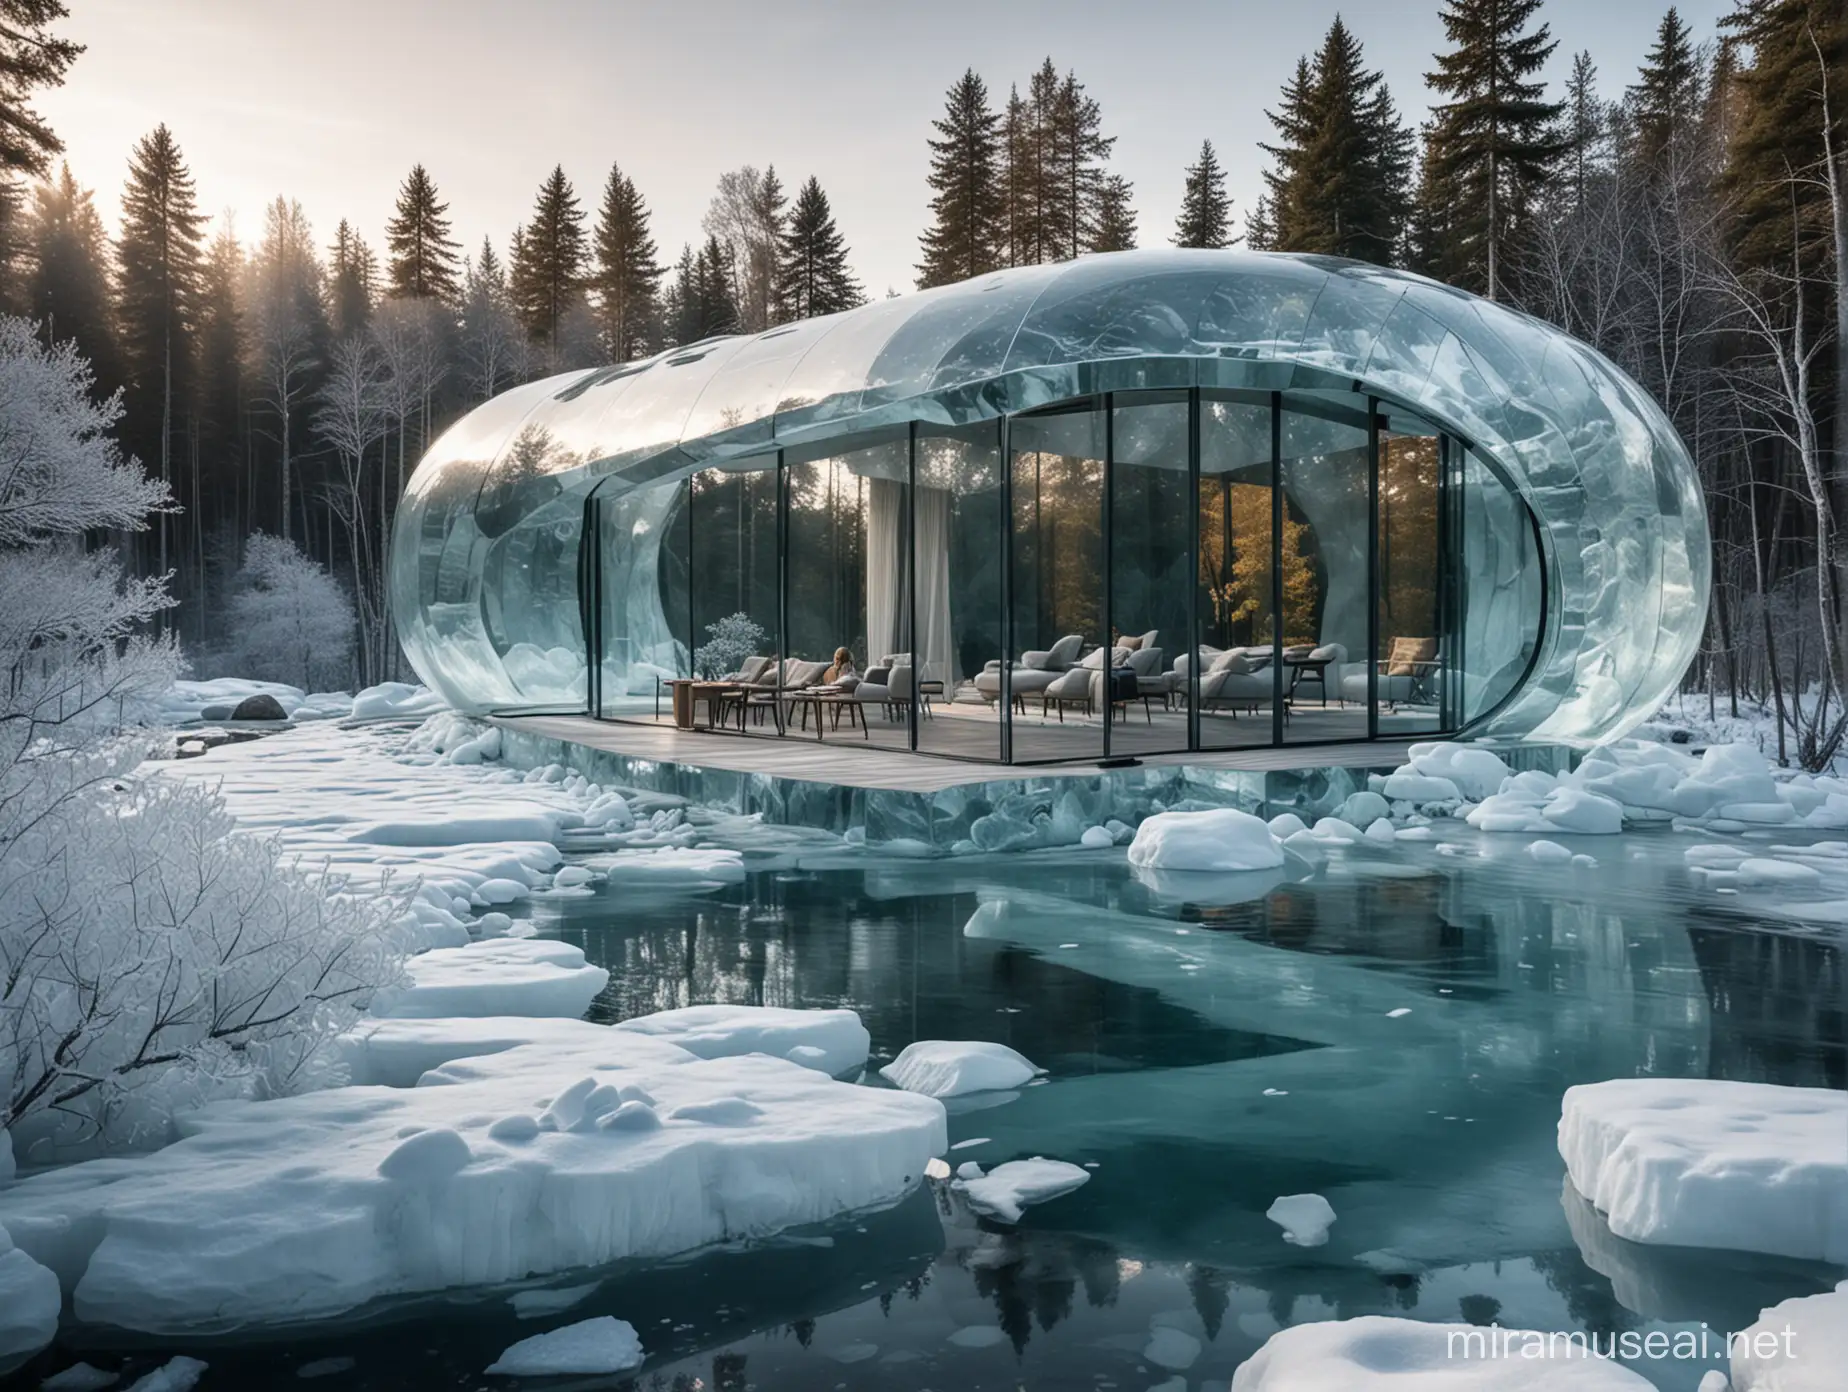 design organic villa made out of glass and ice with peoplw around it surrounded by nature 

